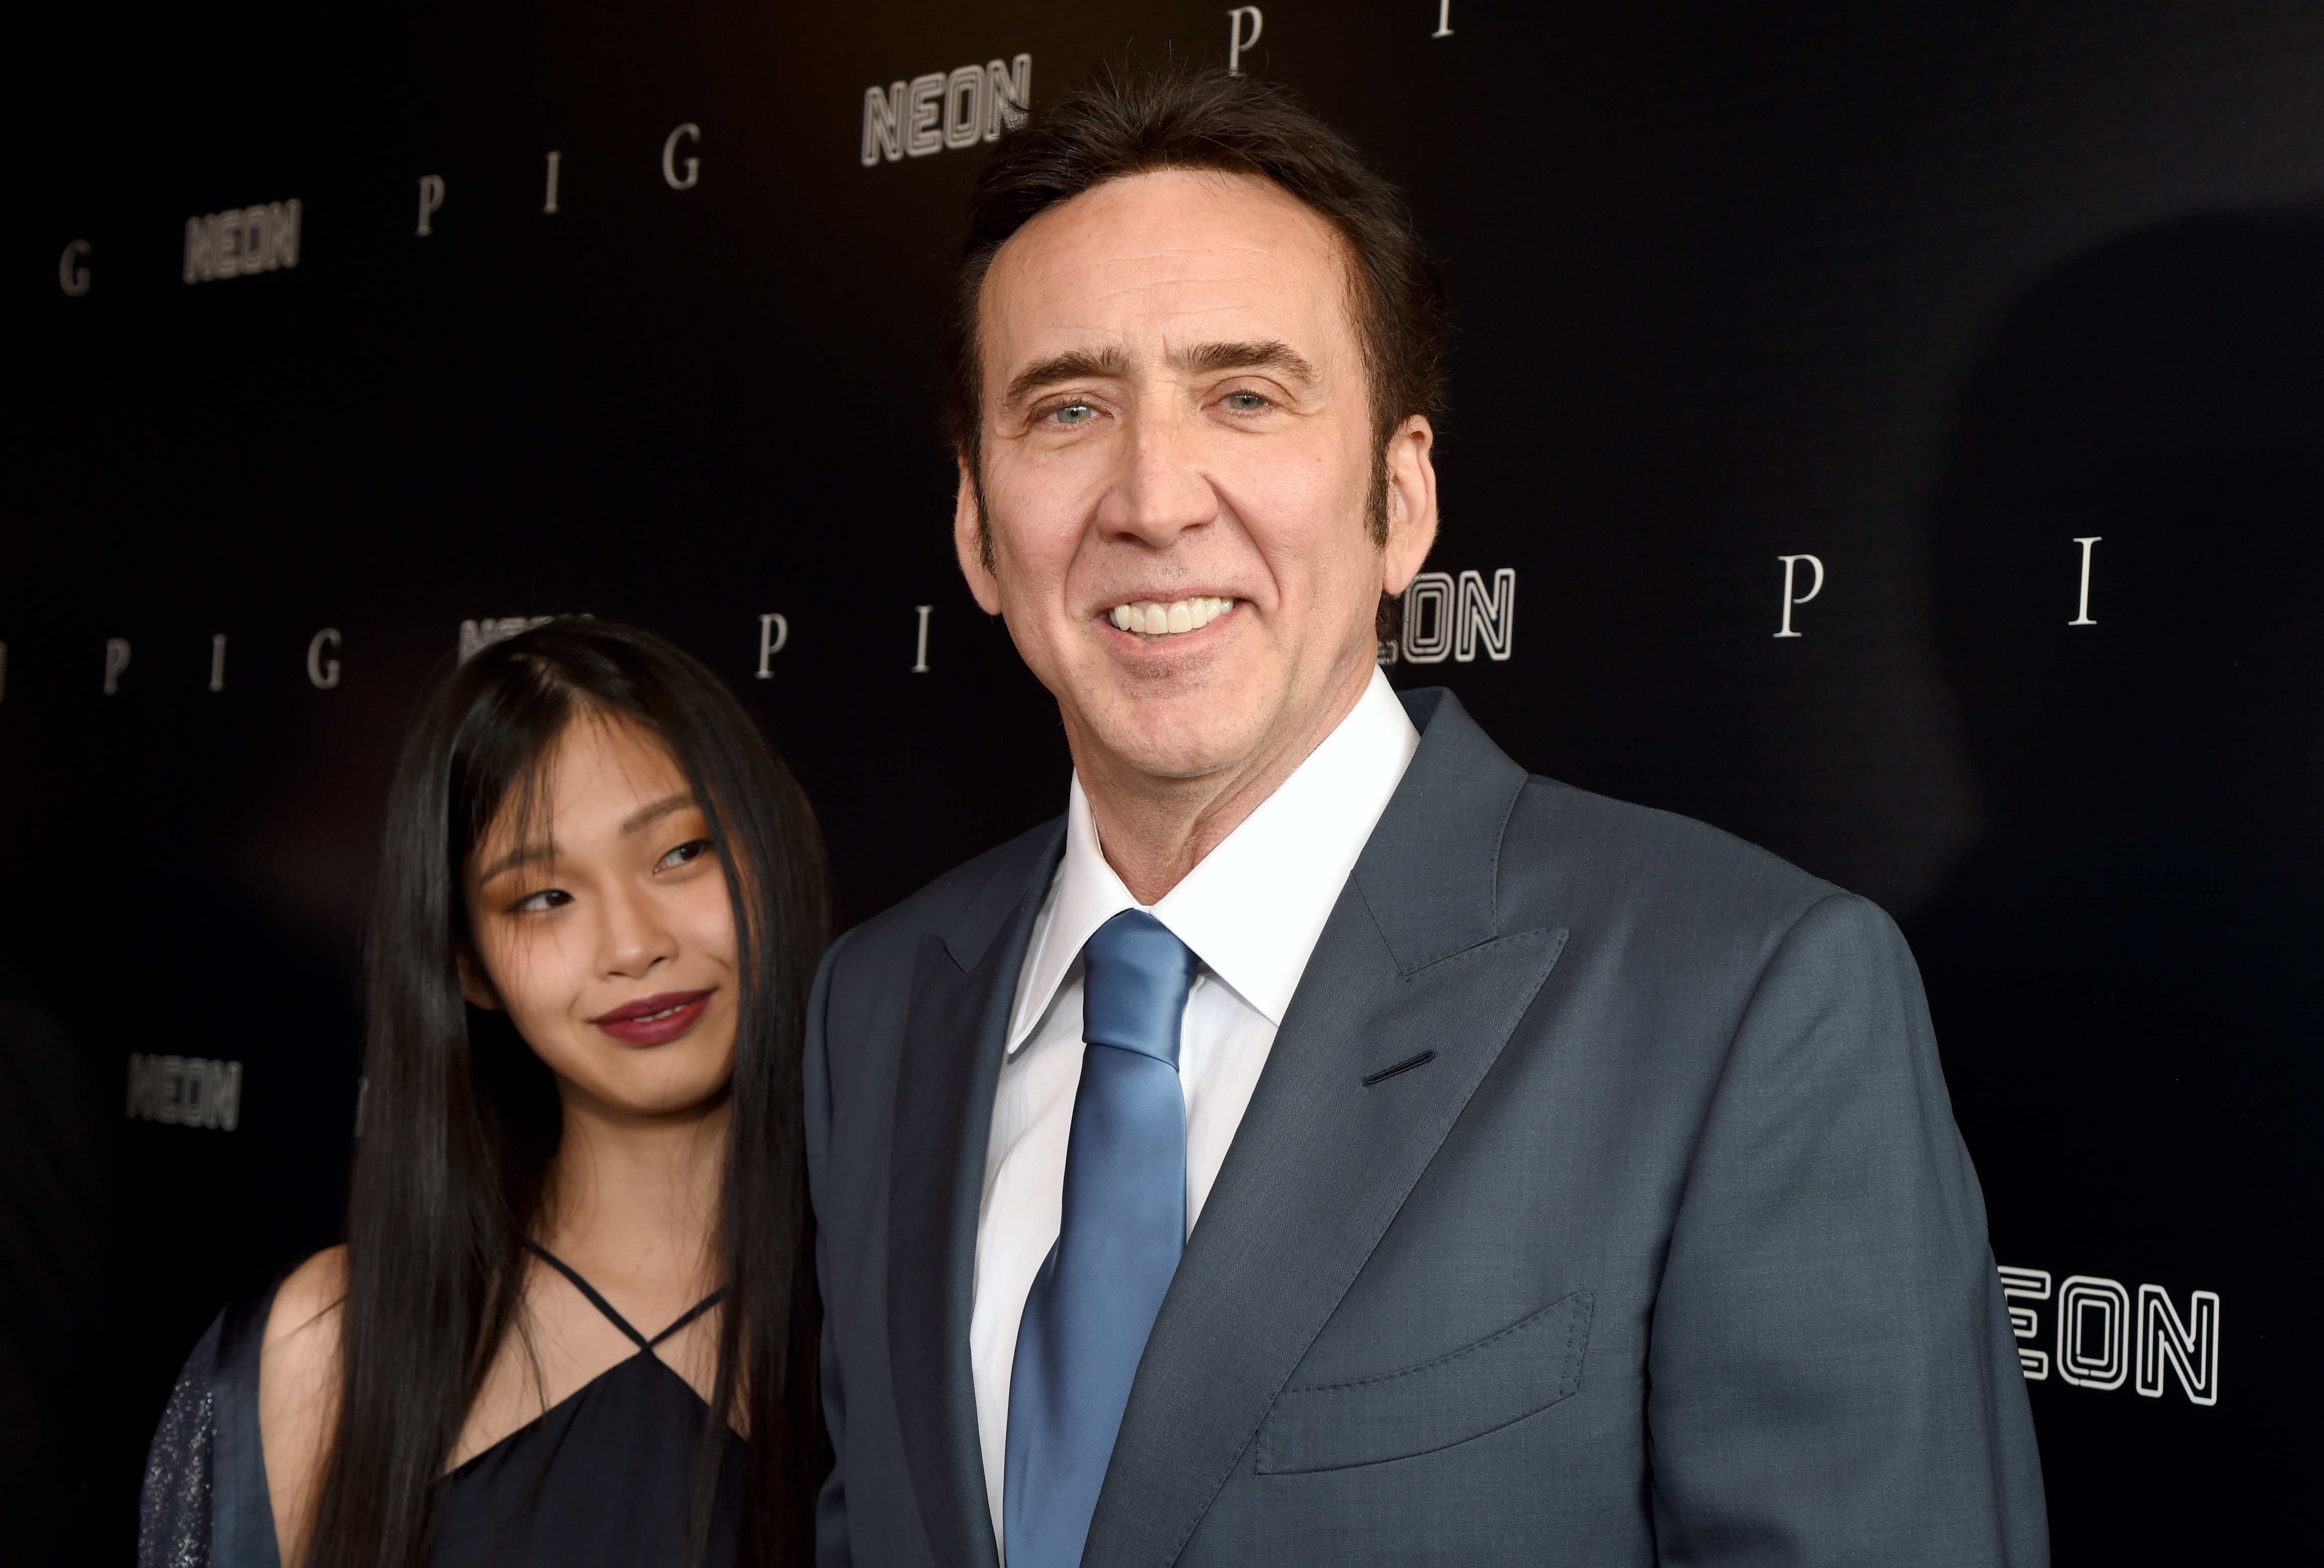 Riko Shibata and Nicolas Cage at the Neon Premiere of "PIG" on July 13, 2021 in Los Angeles, California. | Source: Getty Images